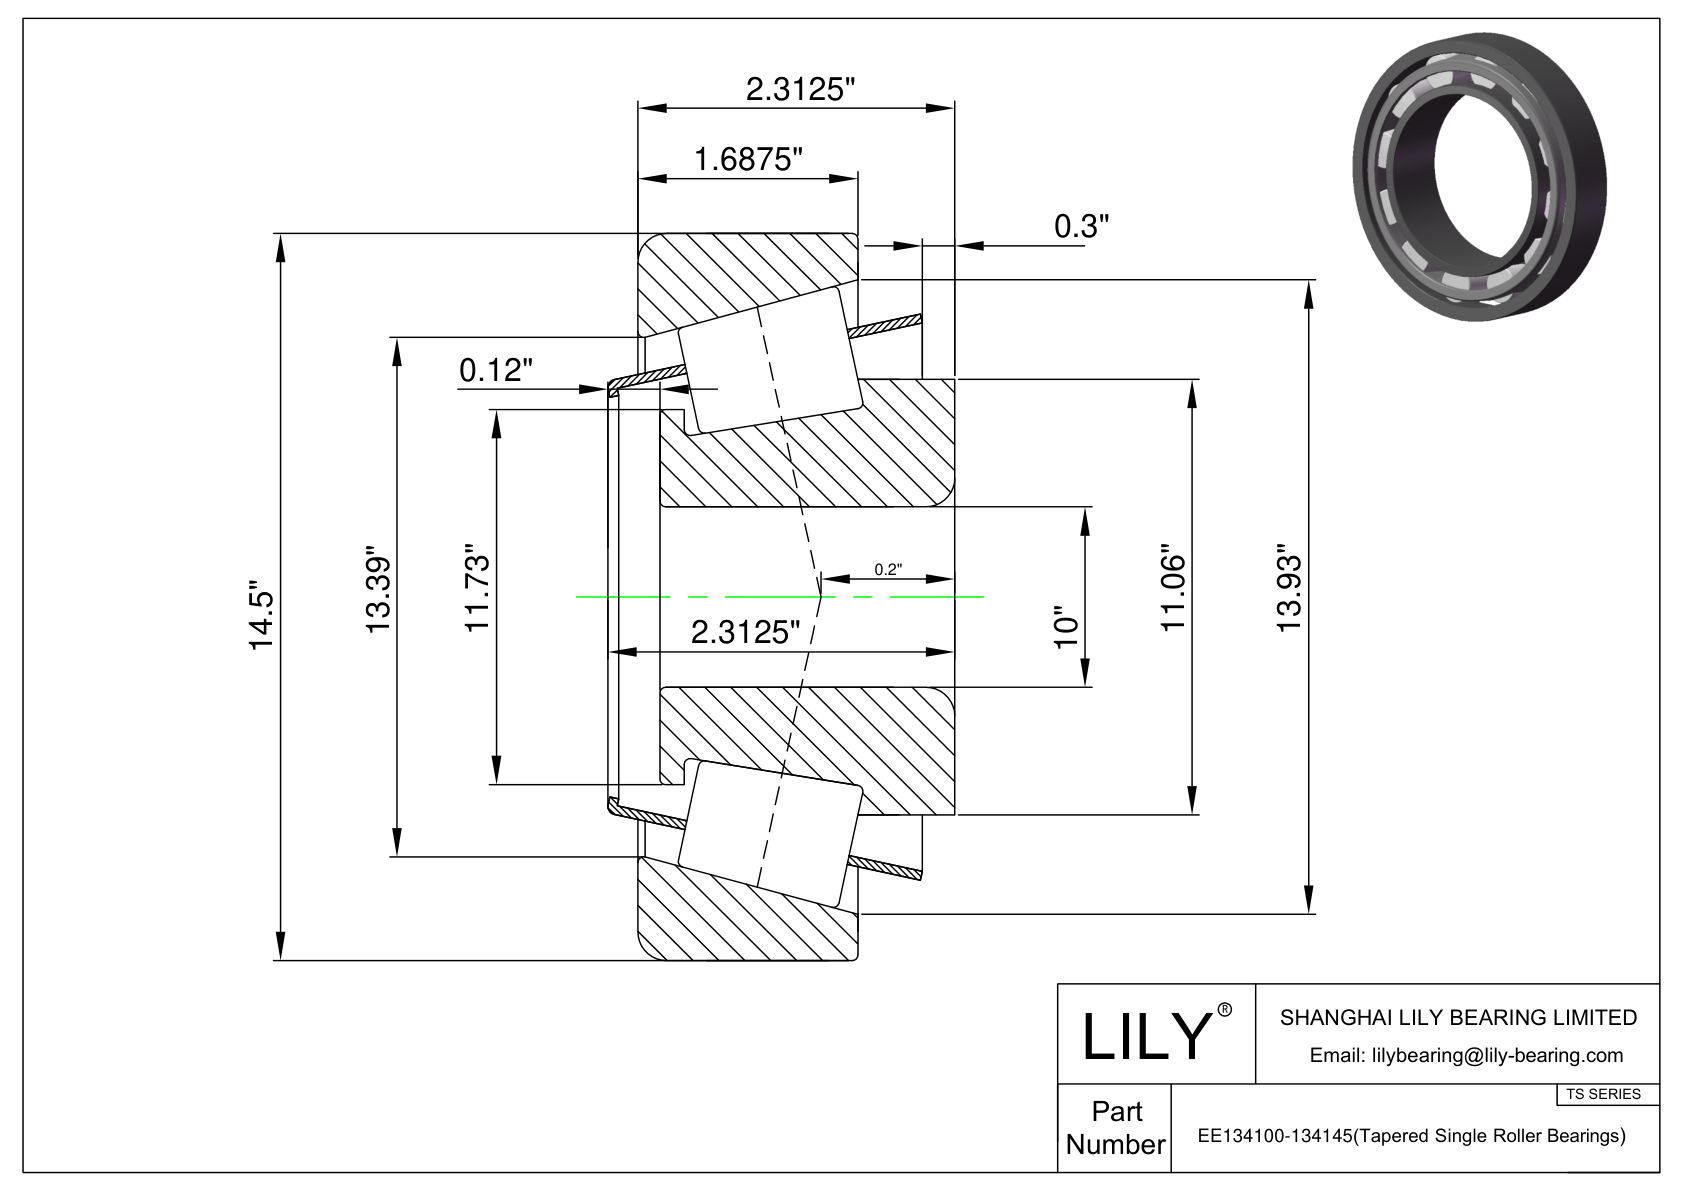 EE134100-134145 TS (Tapered Single Roller Bearings) (Imperial) cad drawing